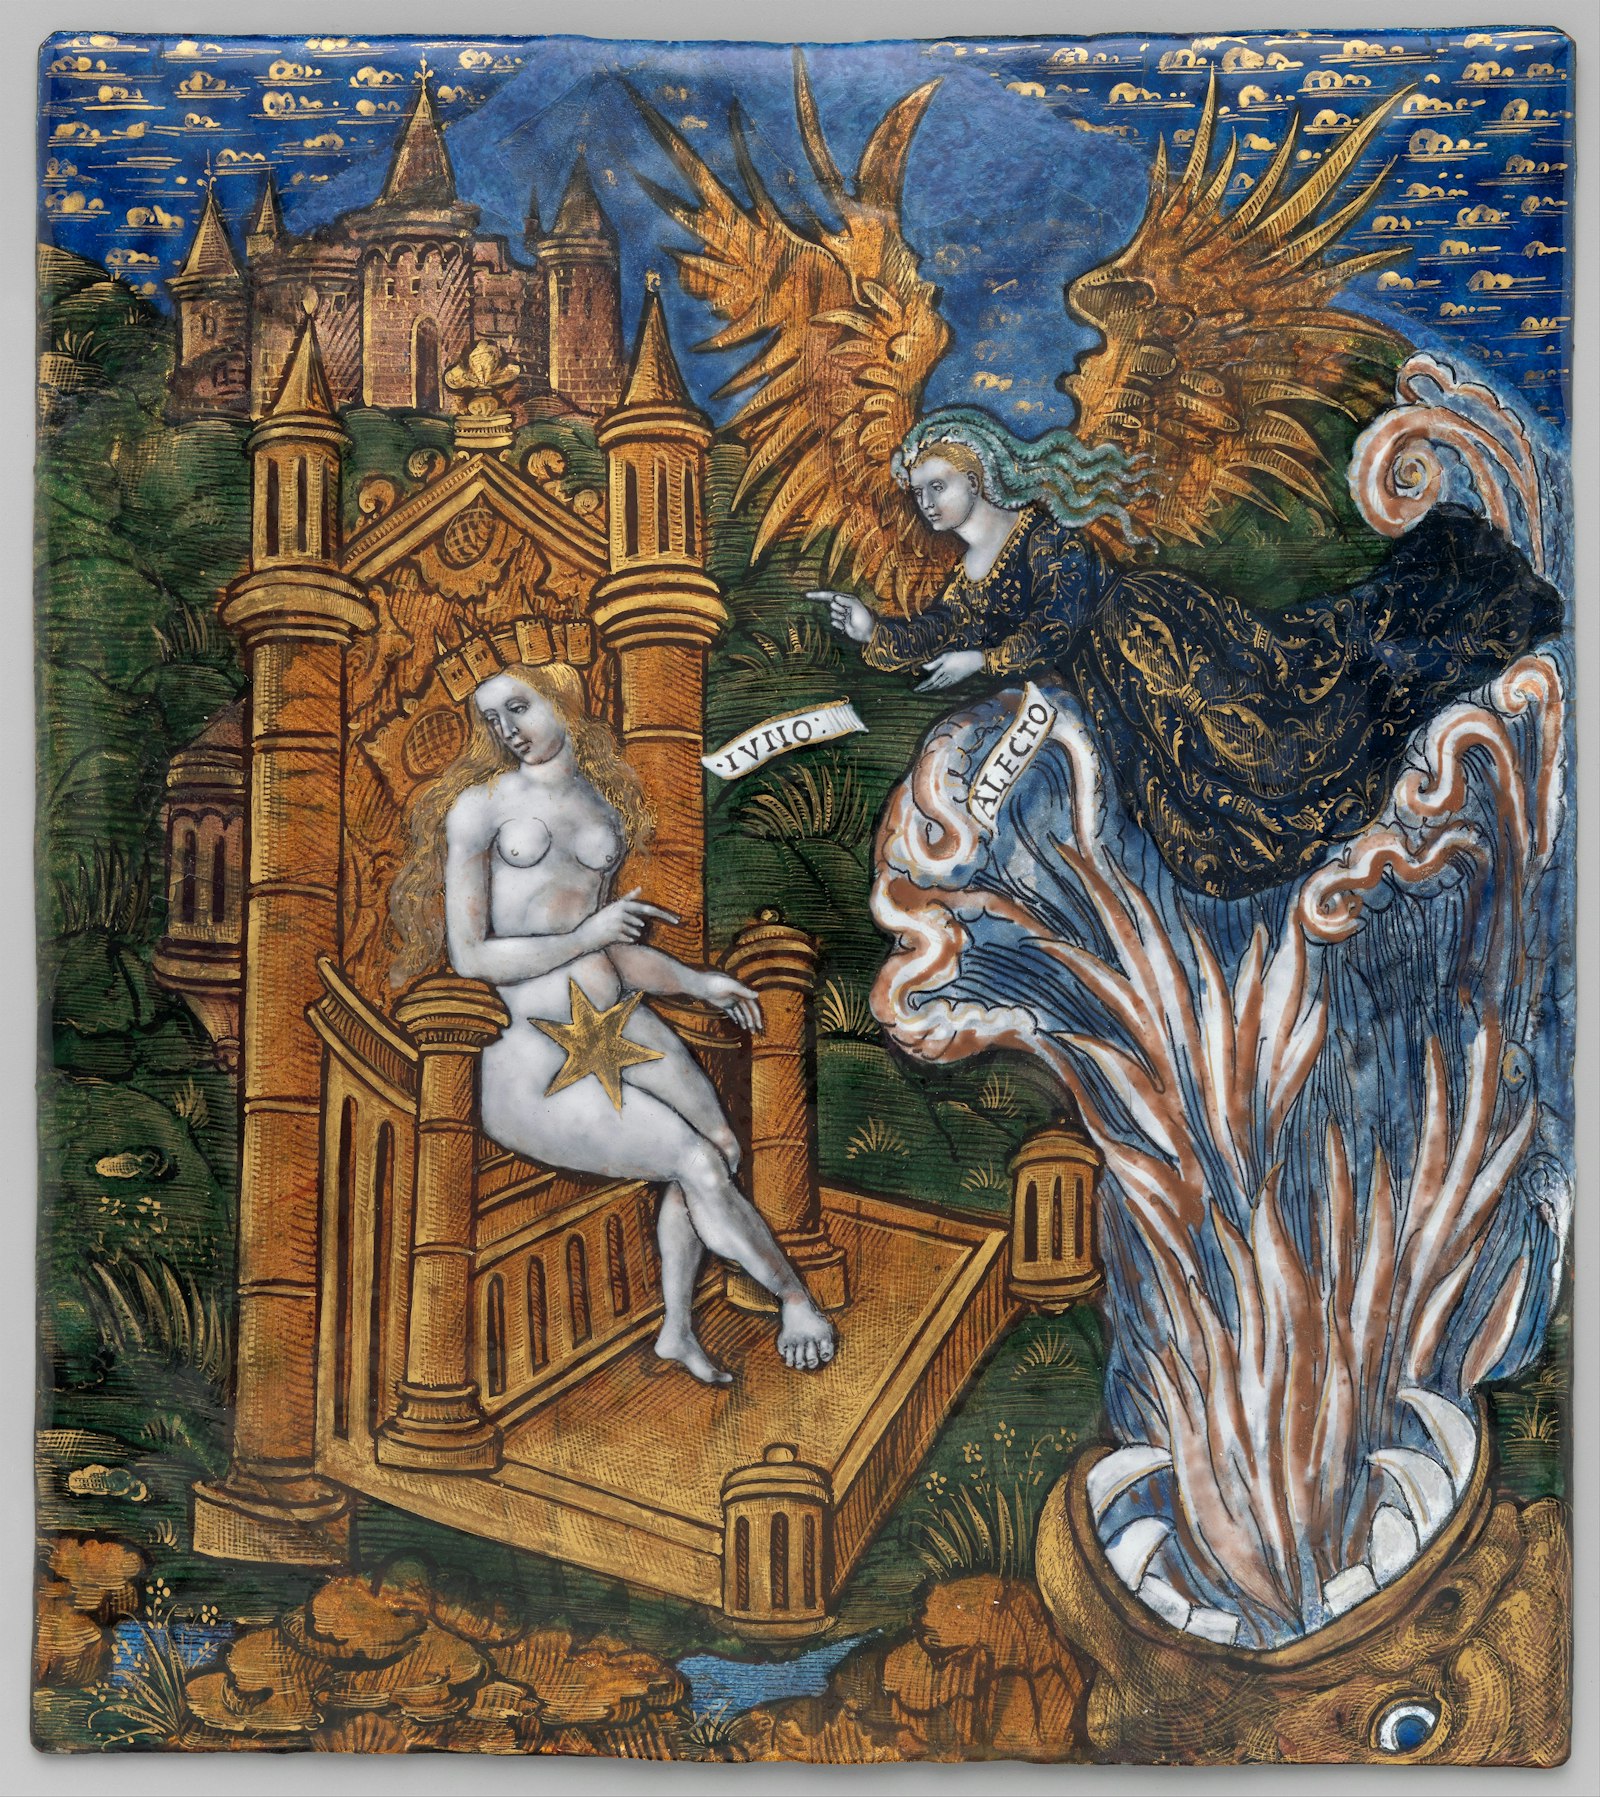 Juno on a Golden Throne Asks Alecto to Confuse Trojans from Aeneid 1530-1535 The Met